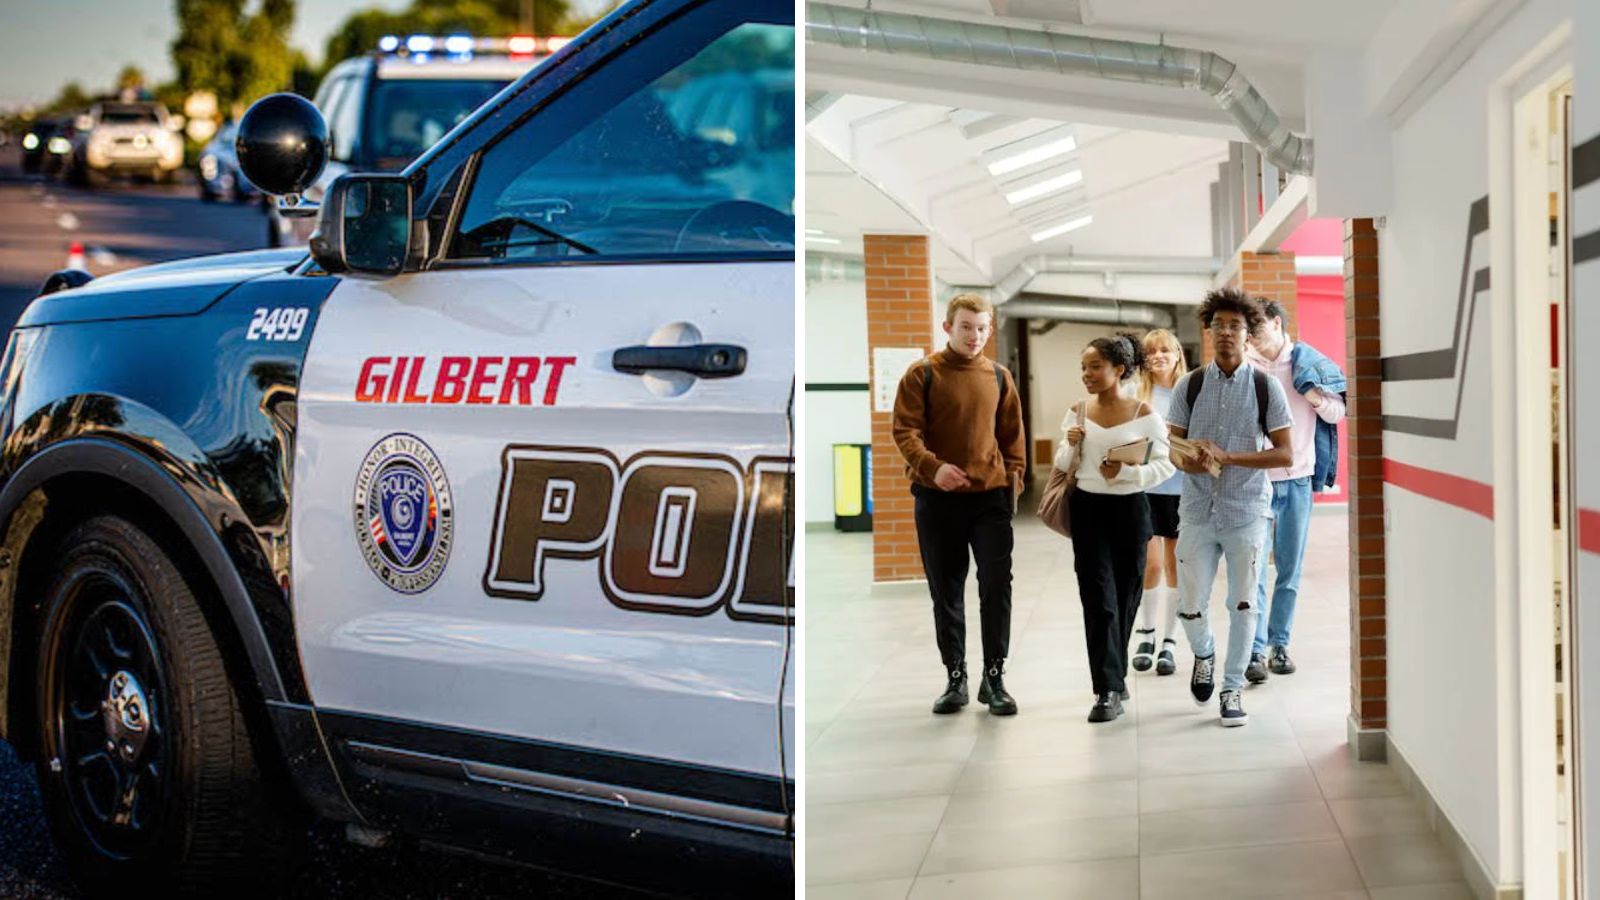 Gilbert Police Department may add new position solely focused on helping youth, chief says